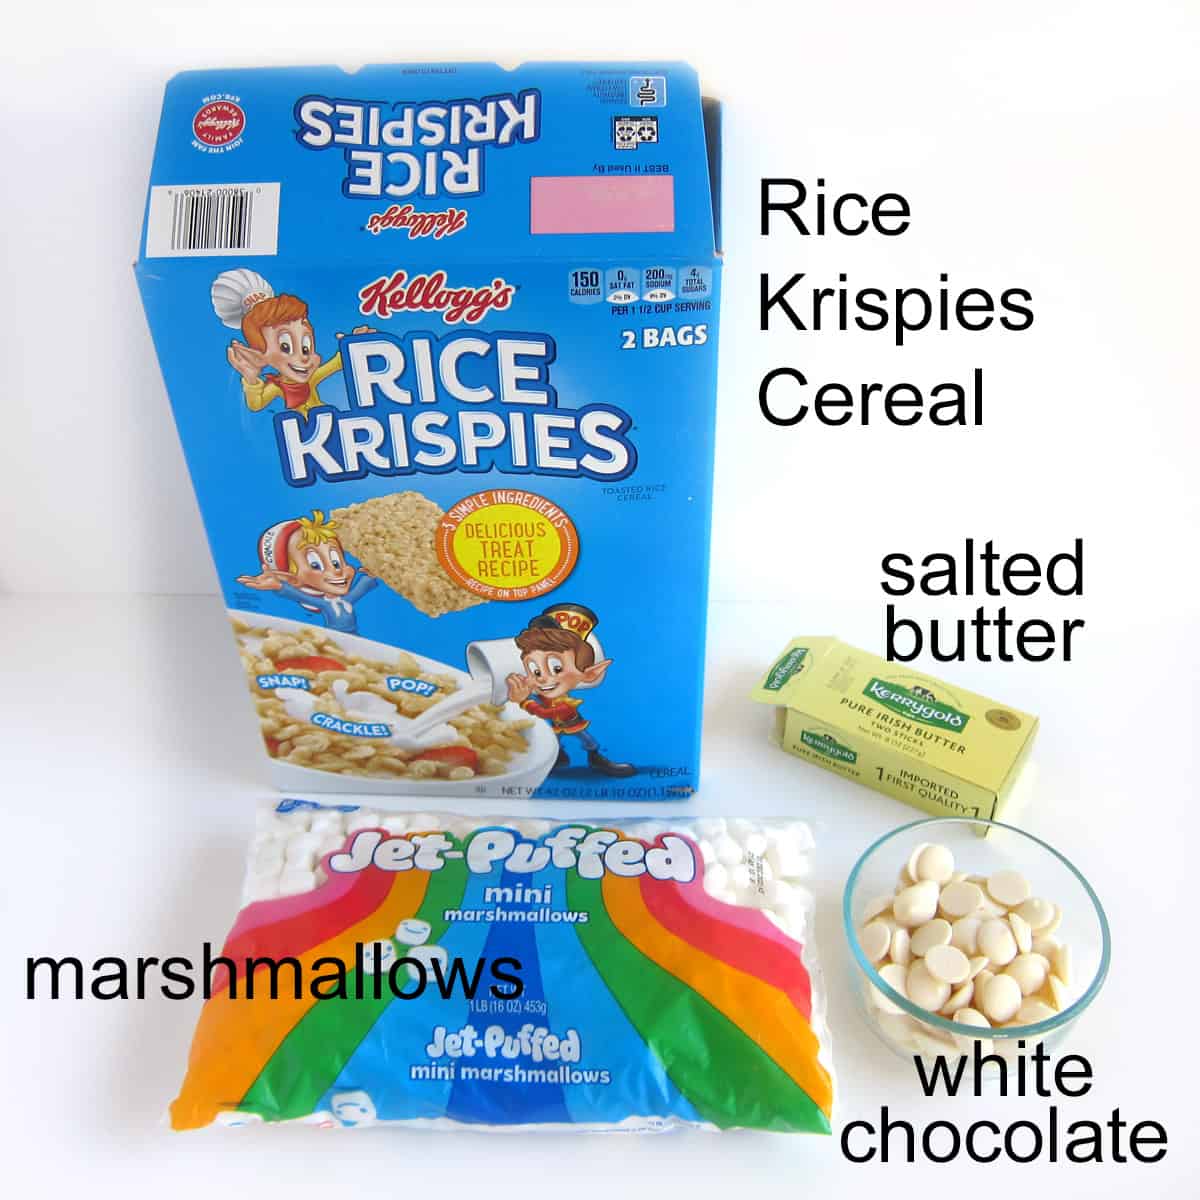 Rice Krispie Treat Skulls Ingredients including Rice Krispies  Cereal, Kerrygold Salted Butter, Kraft Jet-Puffed Marshmallows, and white chocolate. 